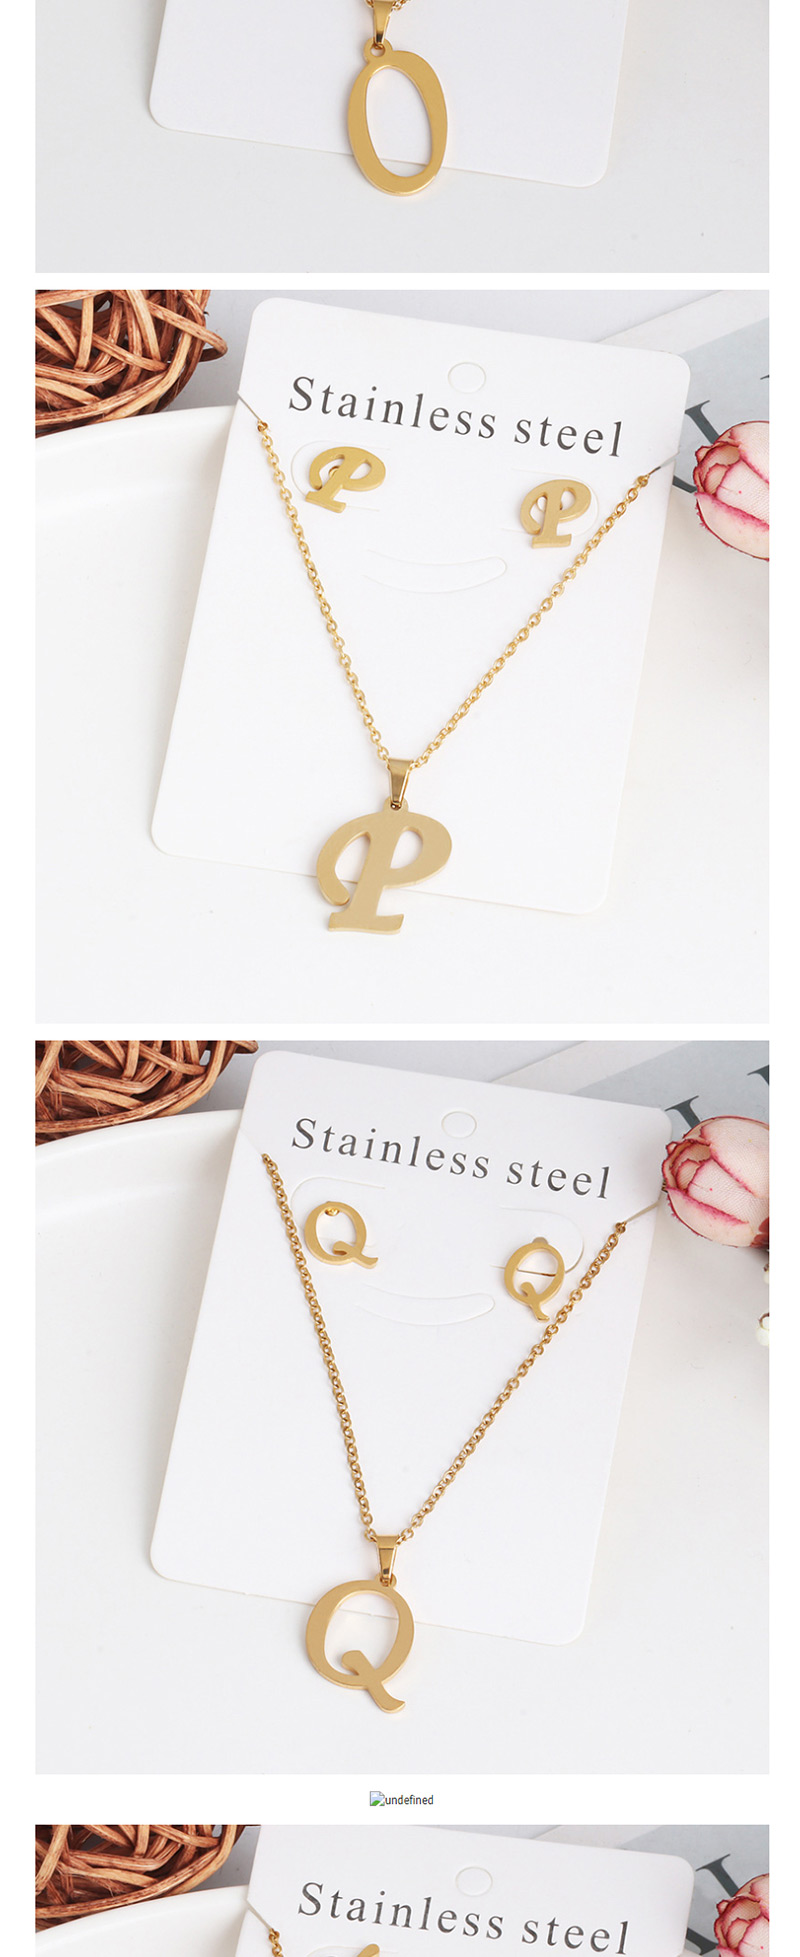 Fashion H Golden Stainless Steel Letter Necklace Earrings Two-piece,Jewelry Sets